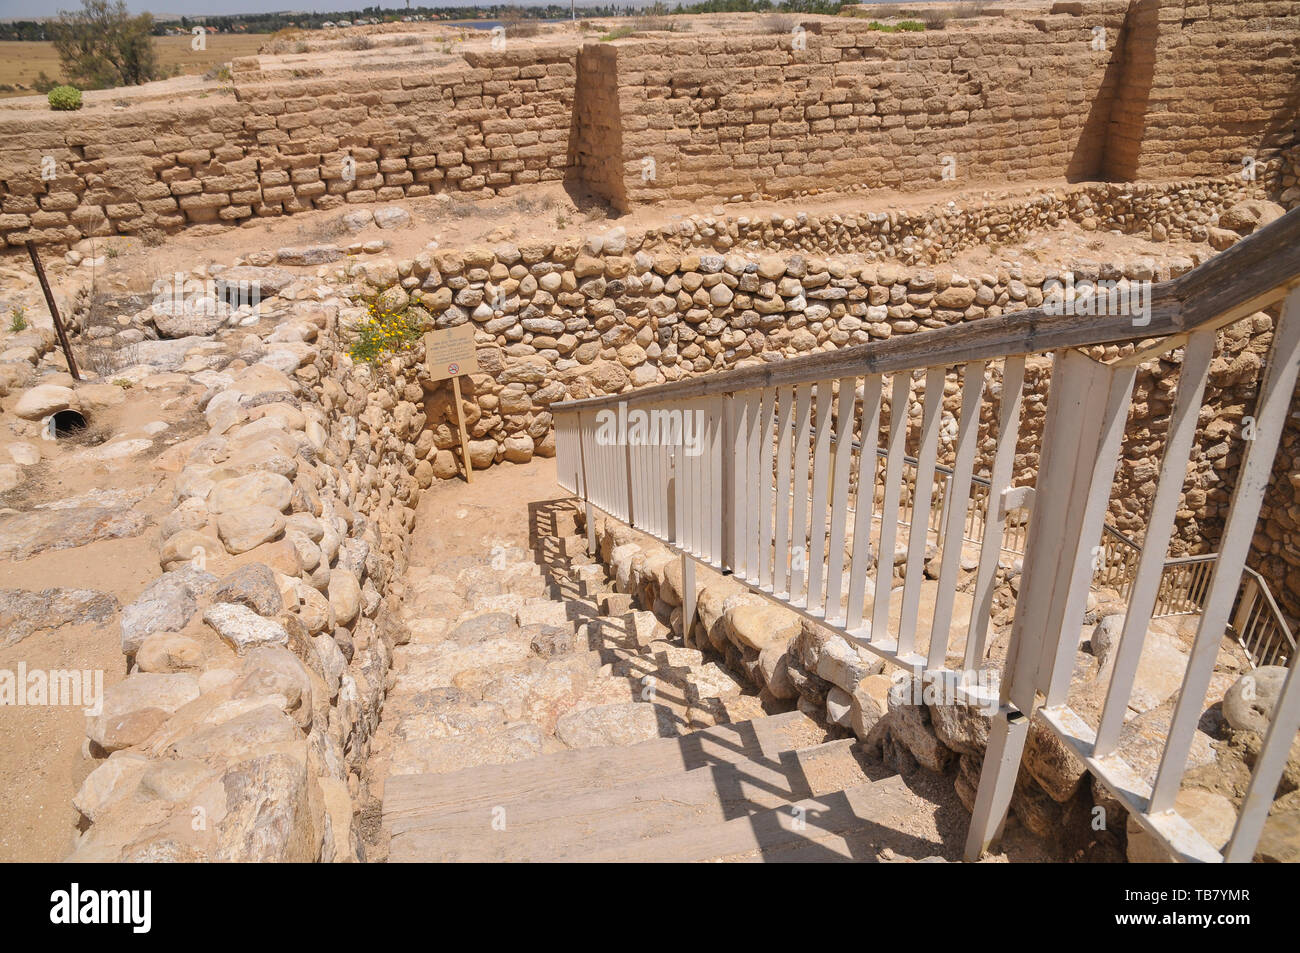 Israel, Negev, Tel Be'er Sheva believed to be the remains of the biblical town of Be'er Sheva. The water system collected flood water from the nearby  Stock Photo